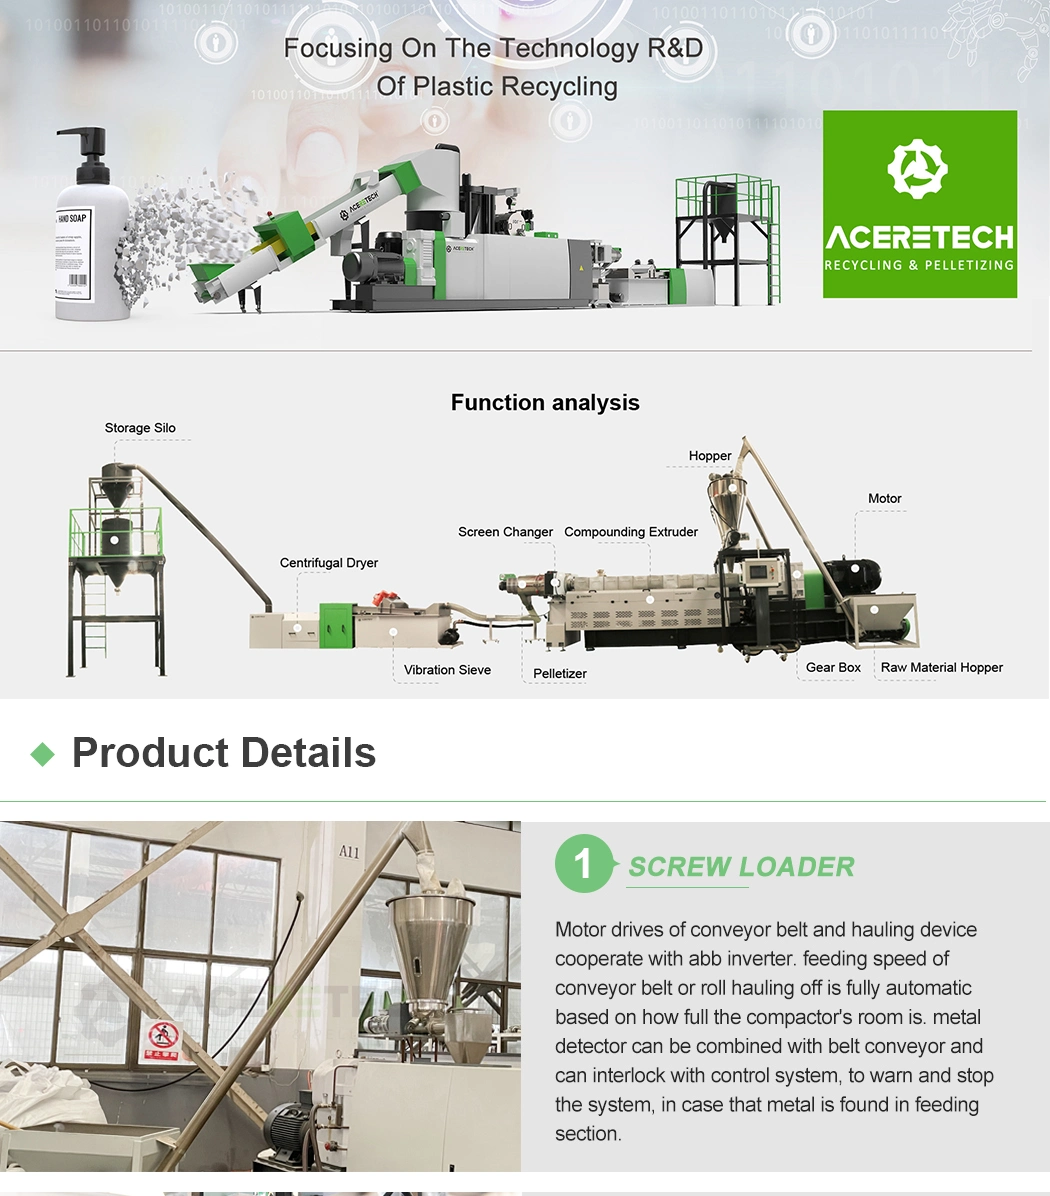 Twin Screw Extrusion Machine for Color Master Batch Compounds